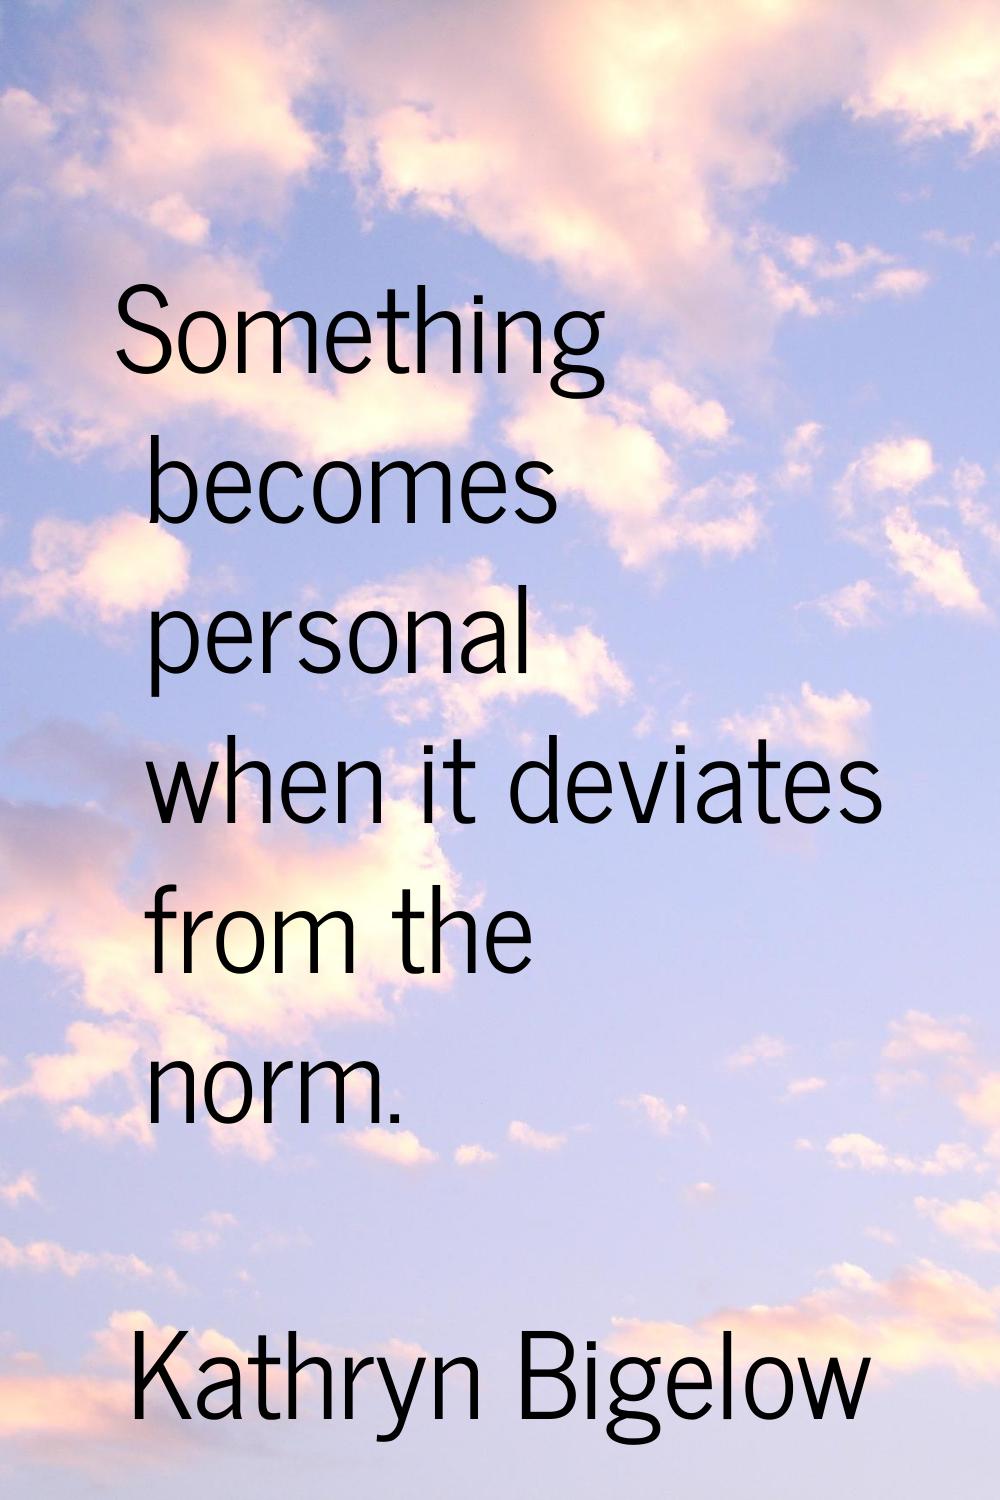 Something becomes personal when it deviates from the norm.